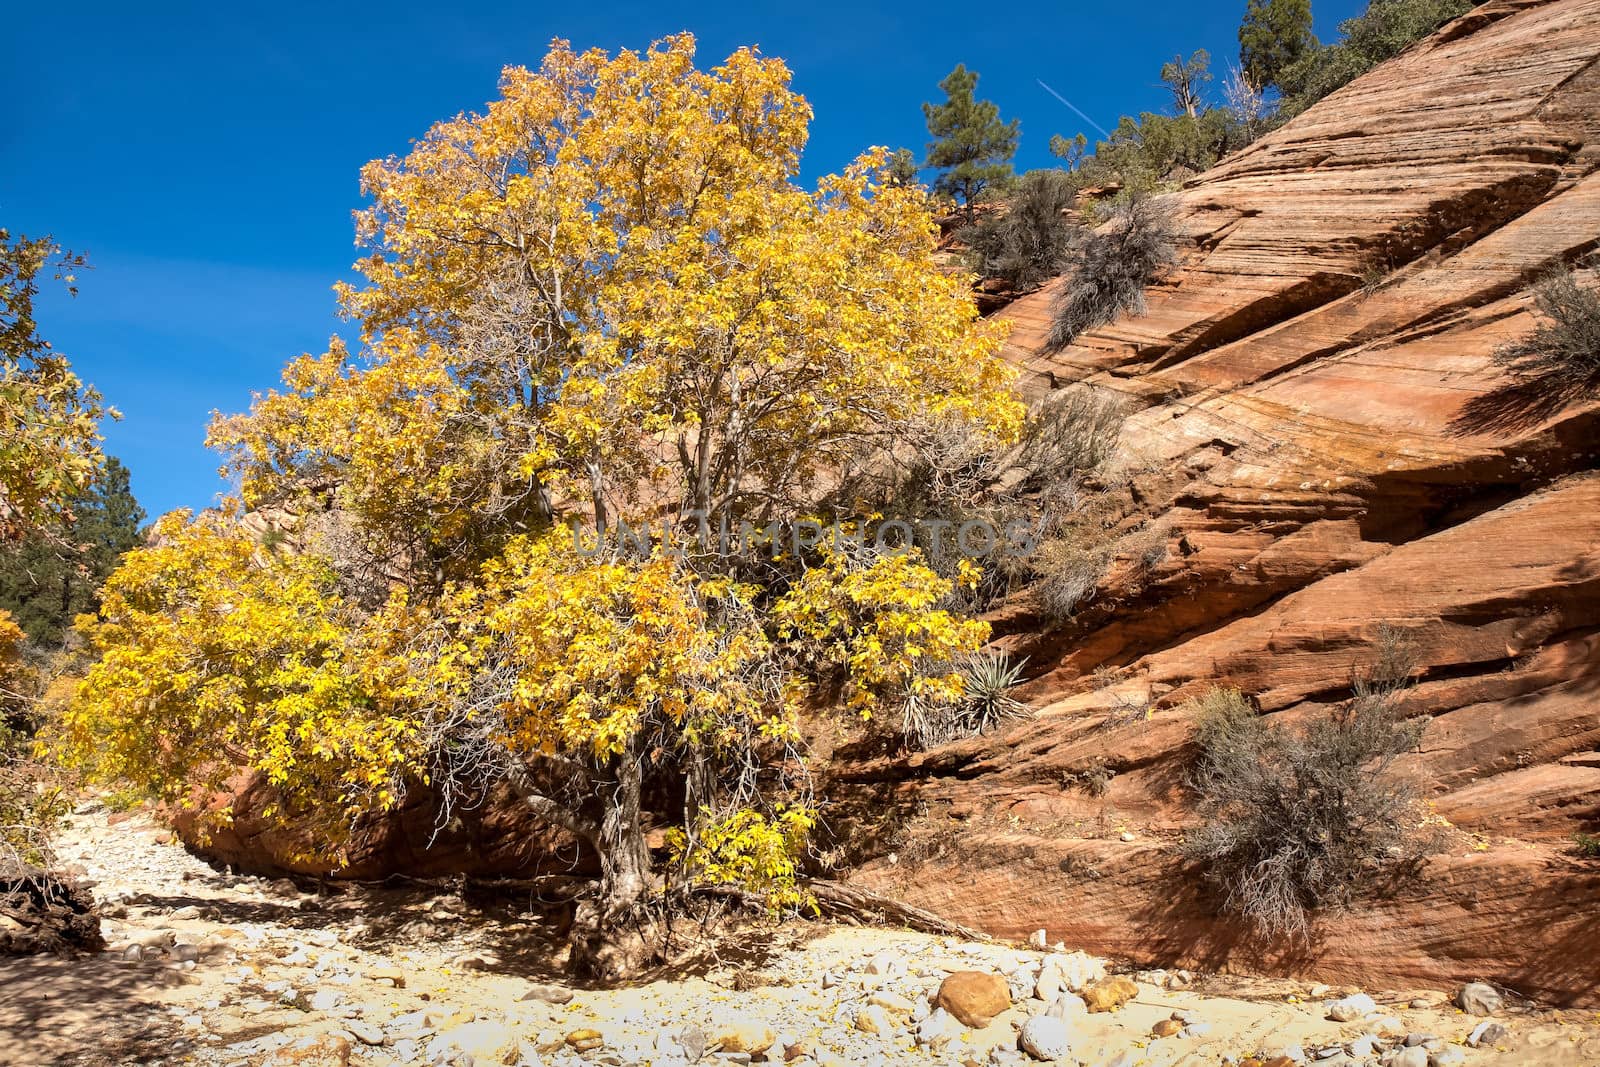 This image shows the Fall colors at Zion National Park.